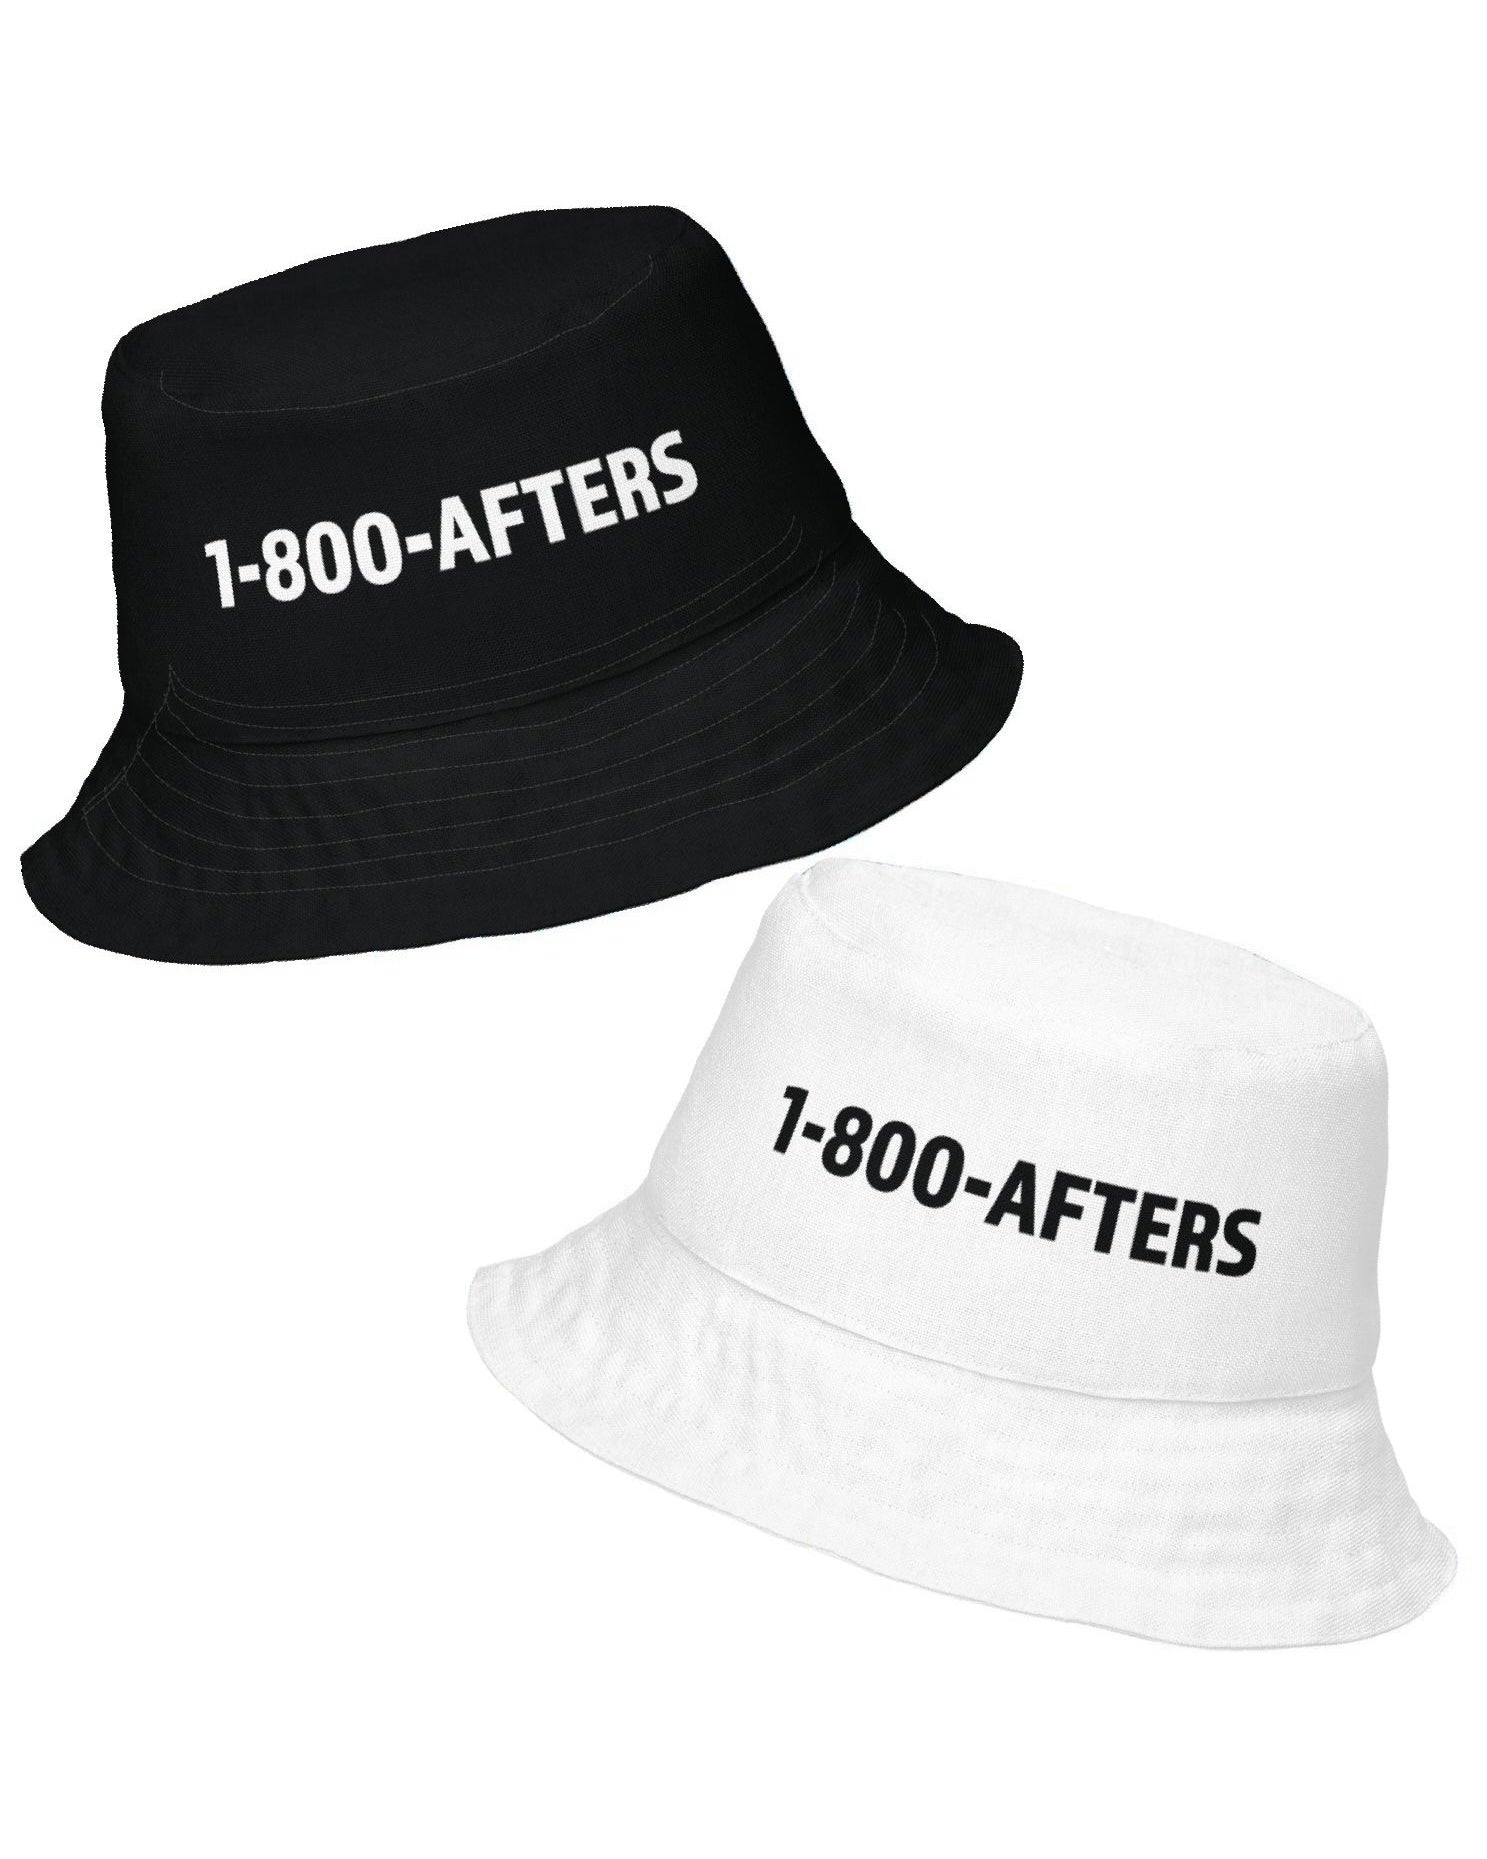 1-800-Afters Reversible Bucket Hat in Black & White